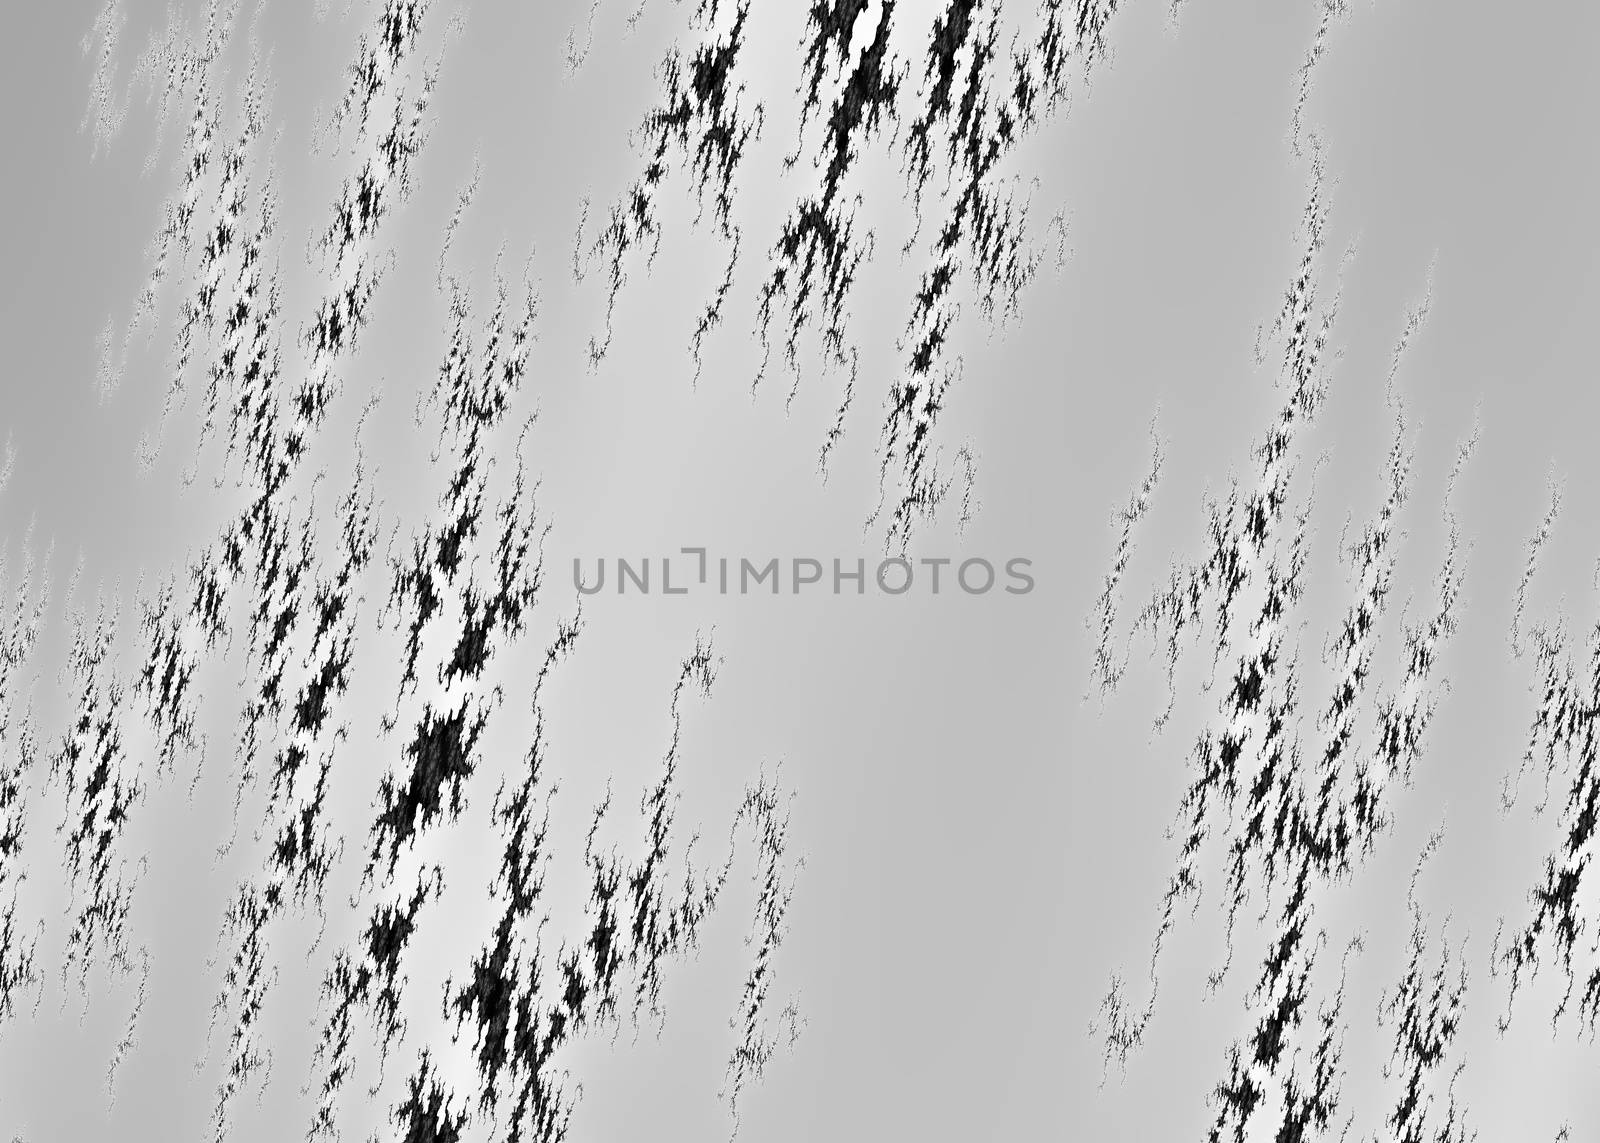 Marble Fractal Background with Black Ornaments on Silver Background - Abstract Illustration, Image